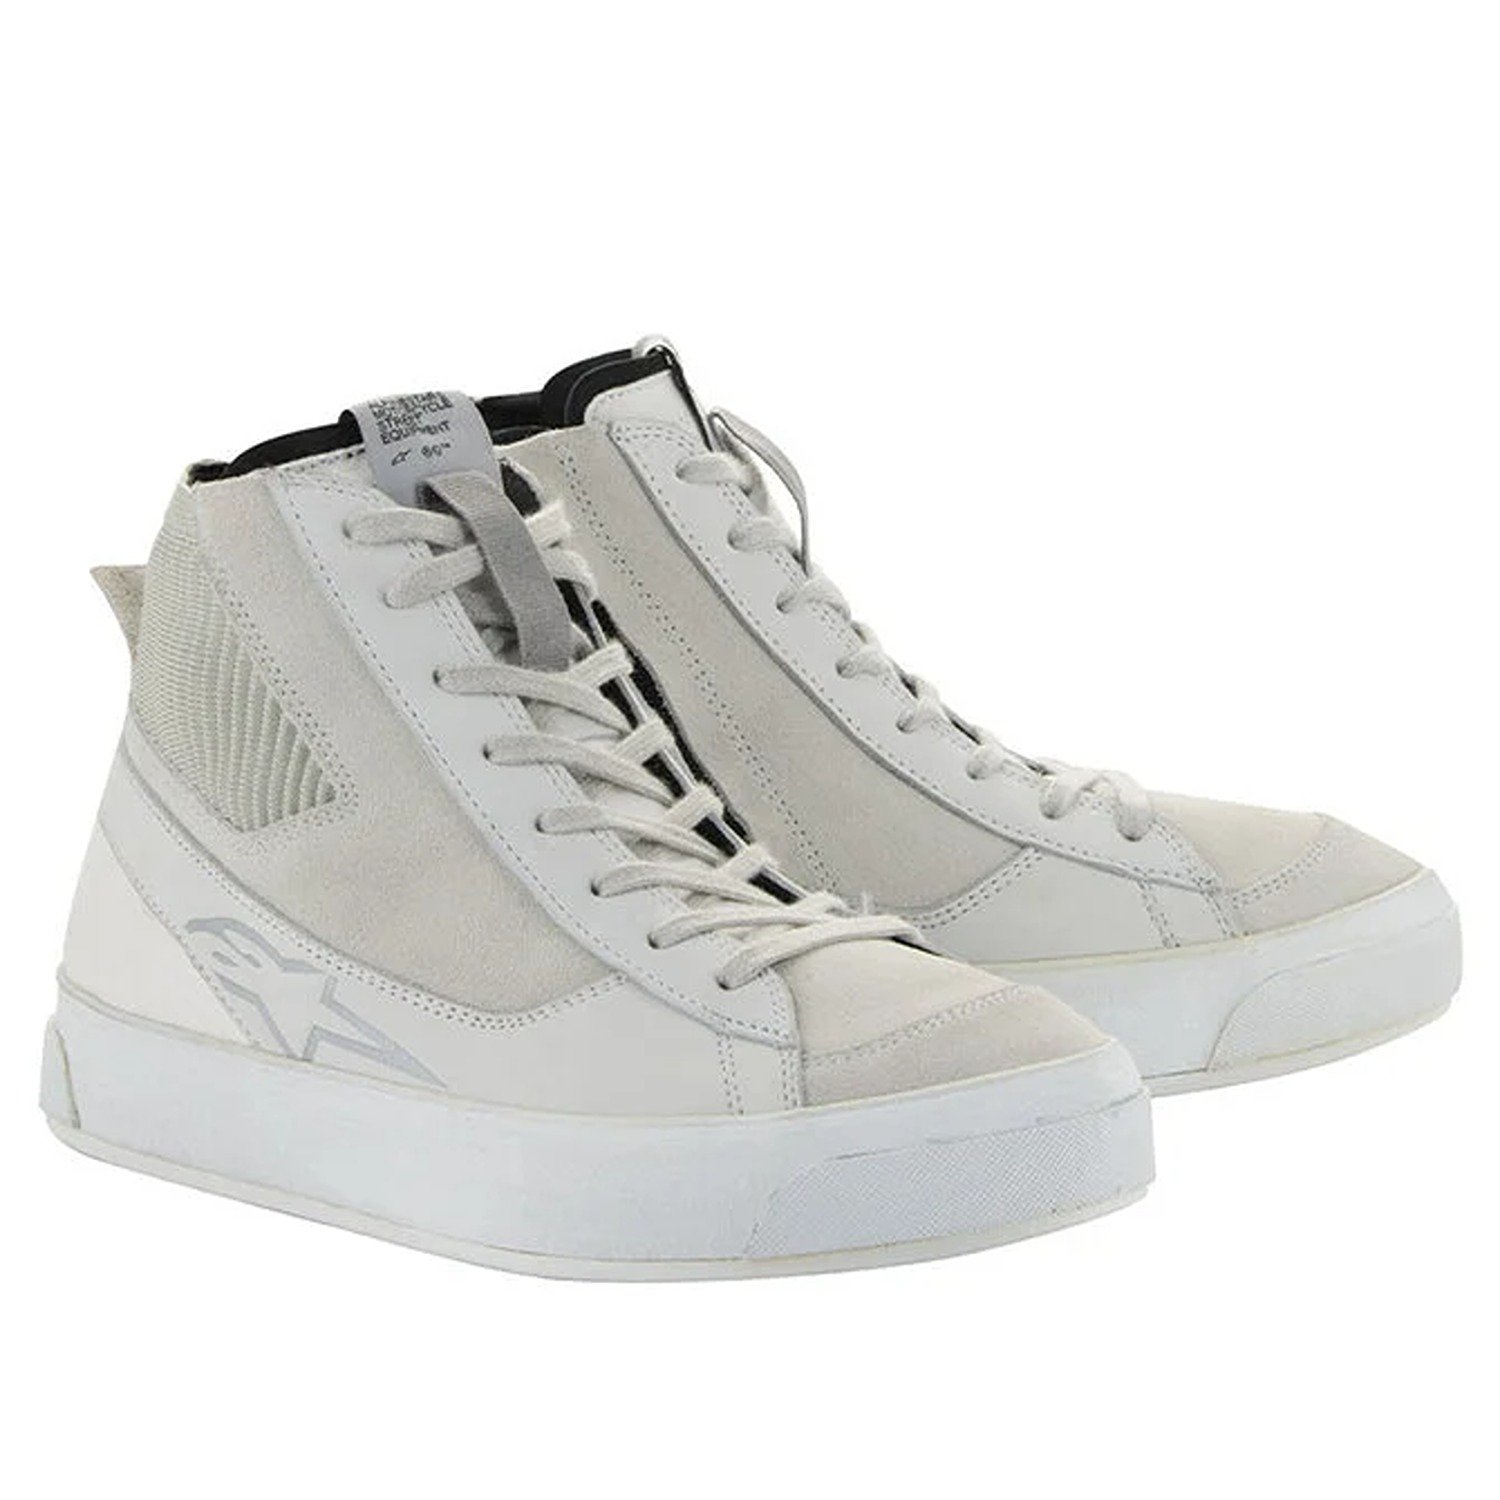 Image of Alpinestars Stated Shoes White Cool Gray Größe US 8